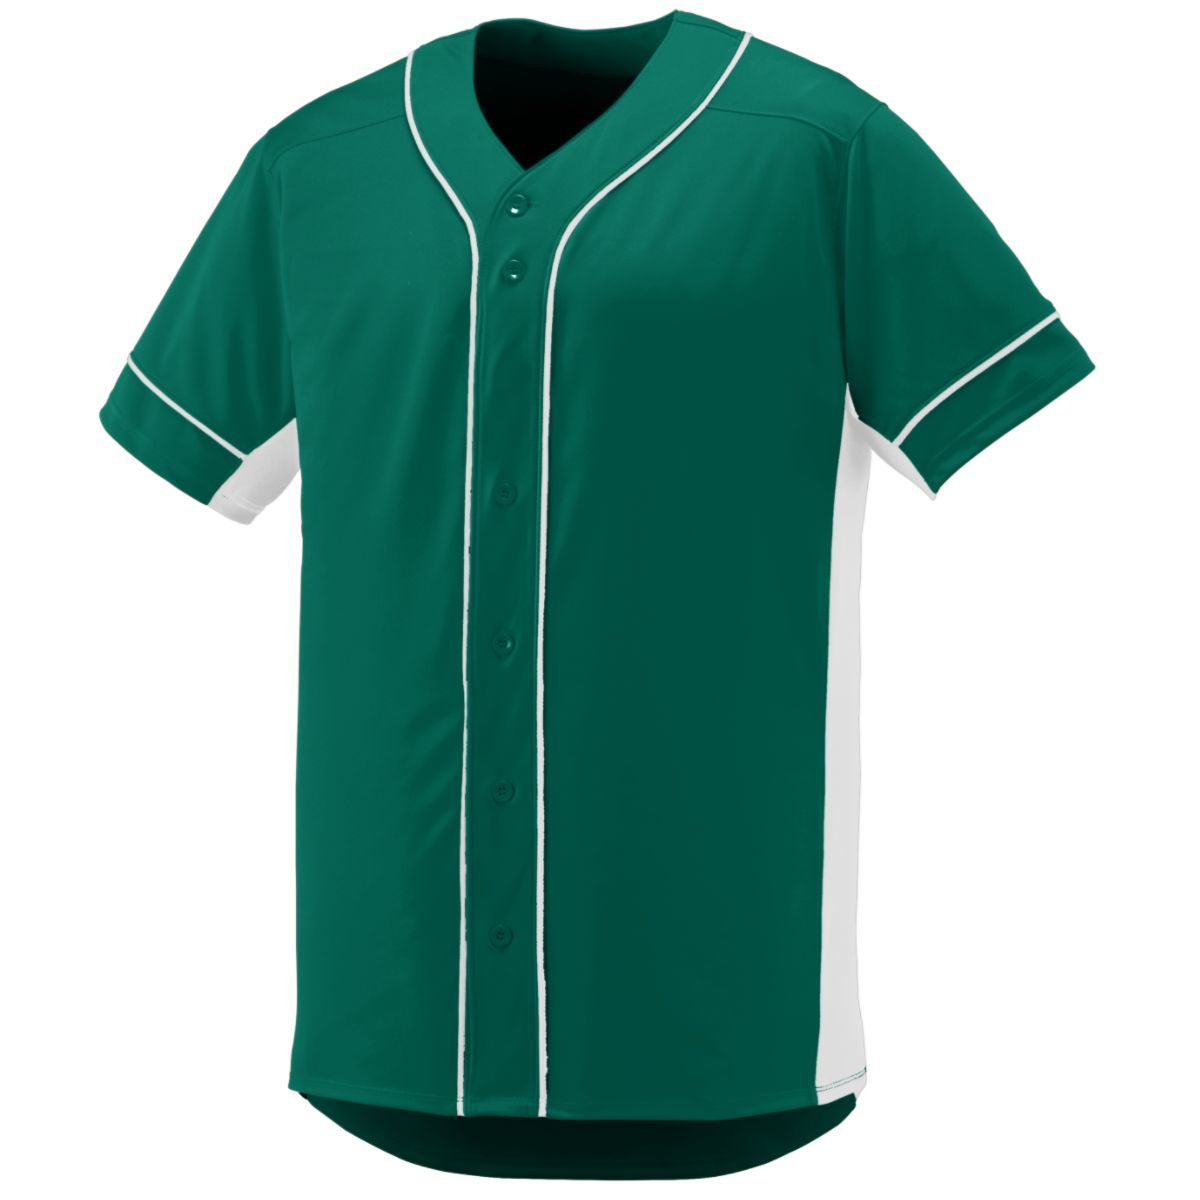 Augusta Sportswear Slugger Jersey in Dark Green/White  -Part of the Adult, Adult-Jersey, Augusta-Products, Baseball, Shirts, All-Sports, All-Sports-1 product lines at KanaleyCreations.com